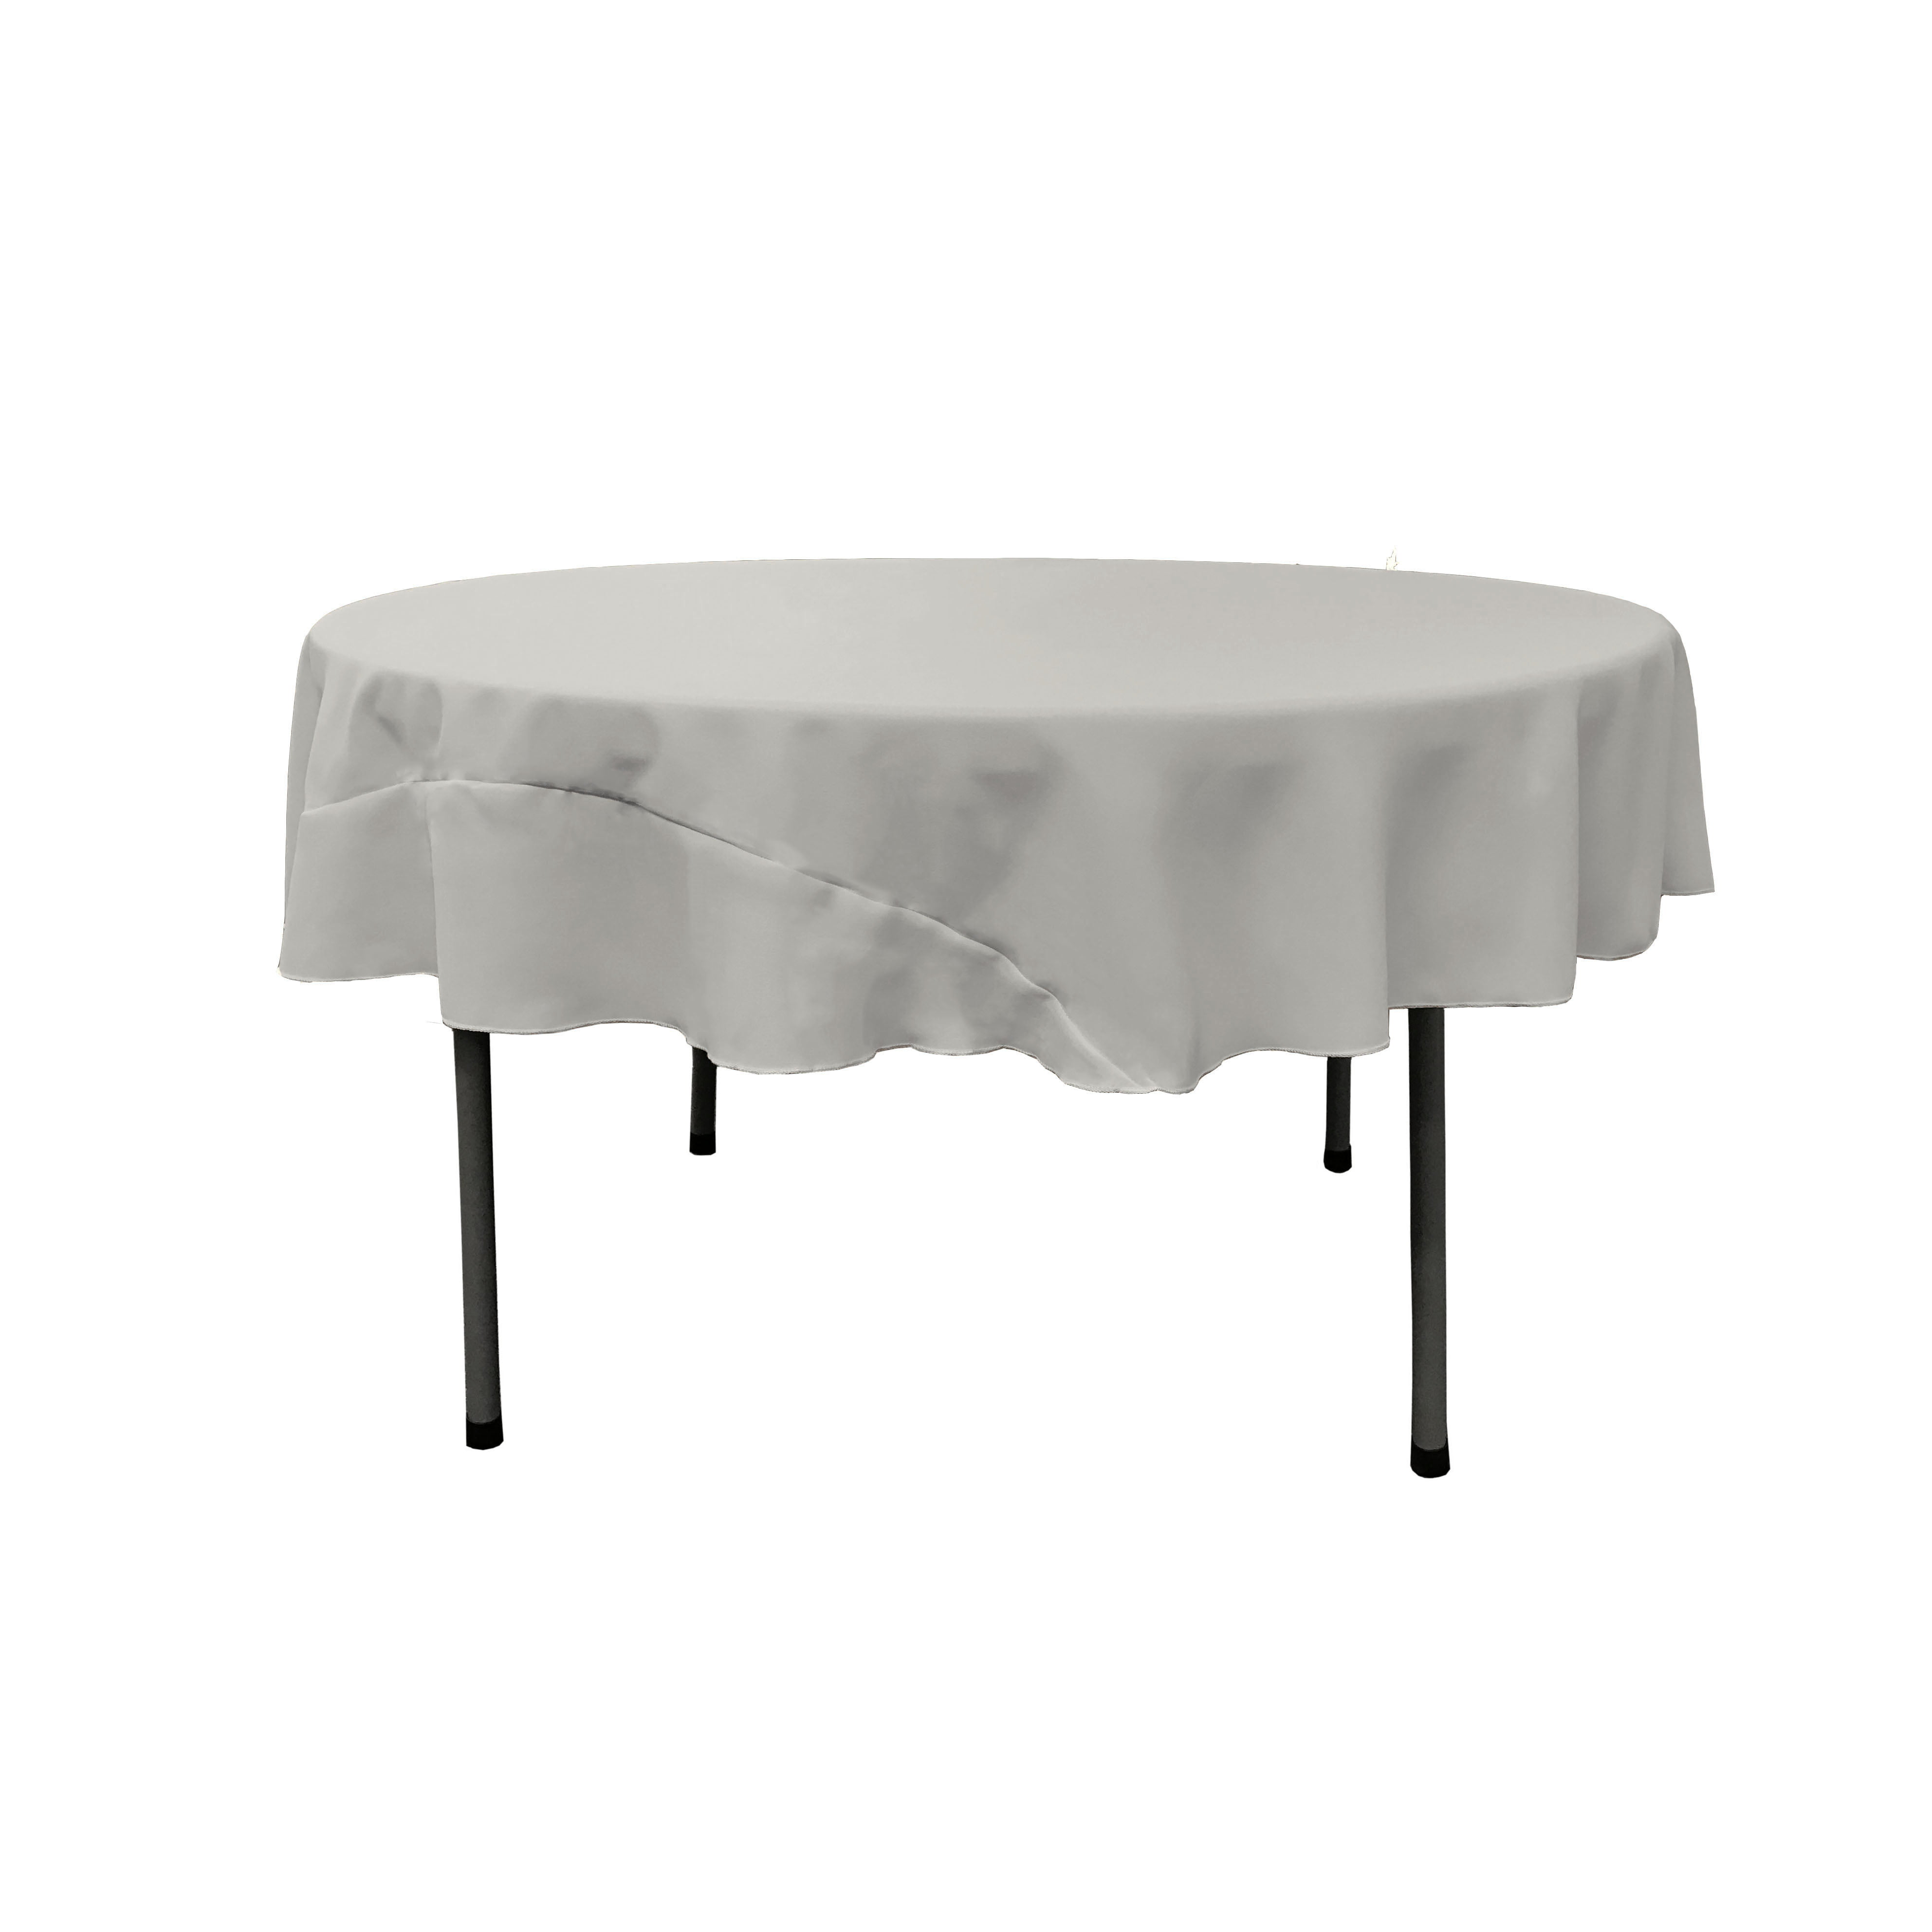 La Linen Polyester Poplin Tablecloth 72, 72 Round Table Tablecloth Size